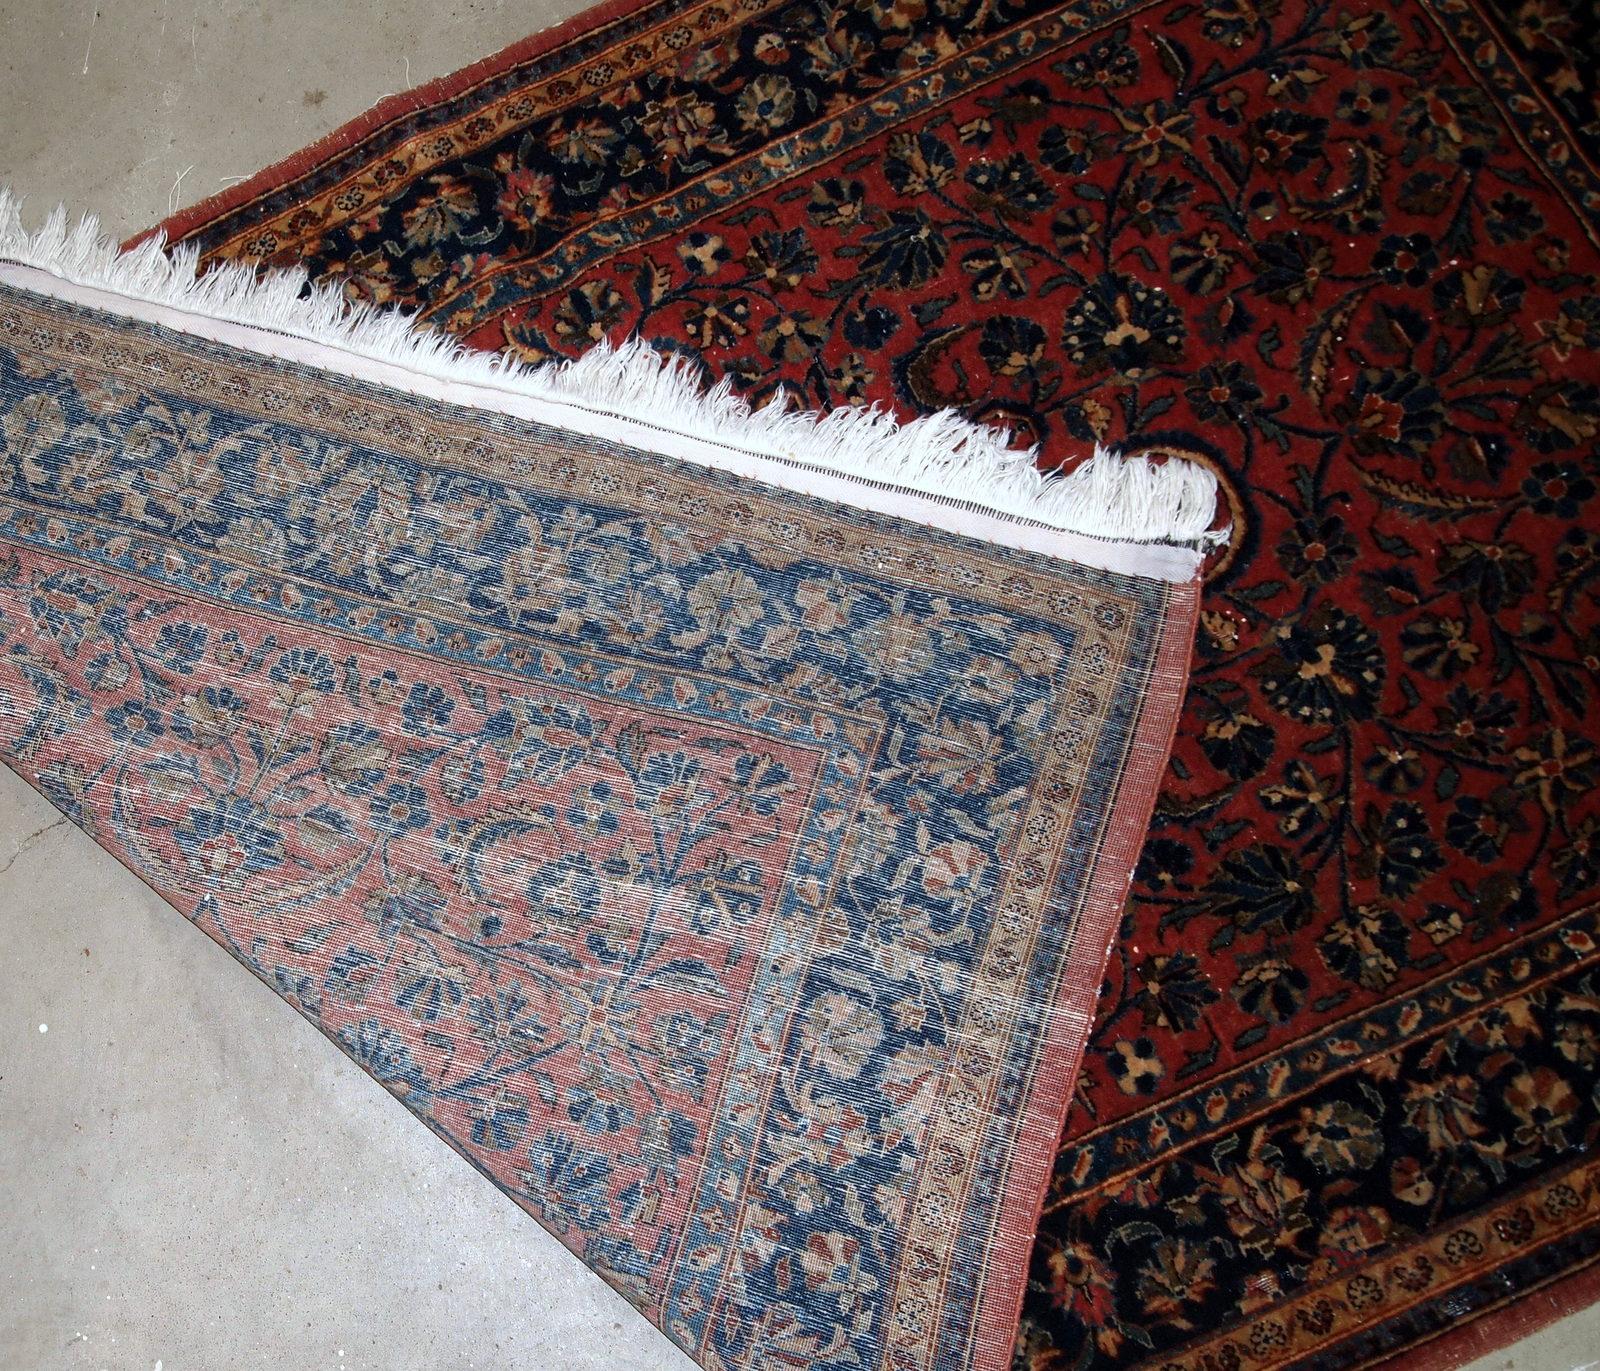 Handmade antique Sarouk style rug in original good condition. The rug is from the beginning of 20th century made in Traditional design.

- Condition: Original good,

- circa 1920s,

- Size: 3.3' x 5.3' (100cm x 161cm),

- Material: